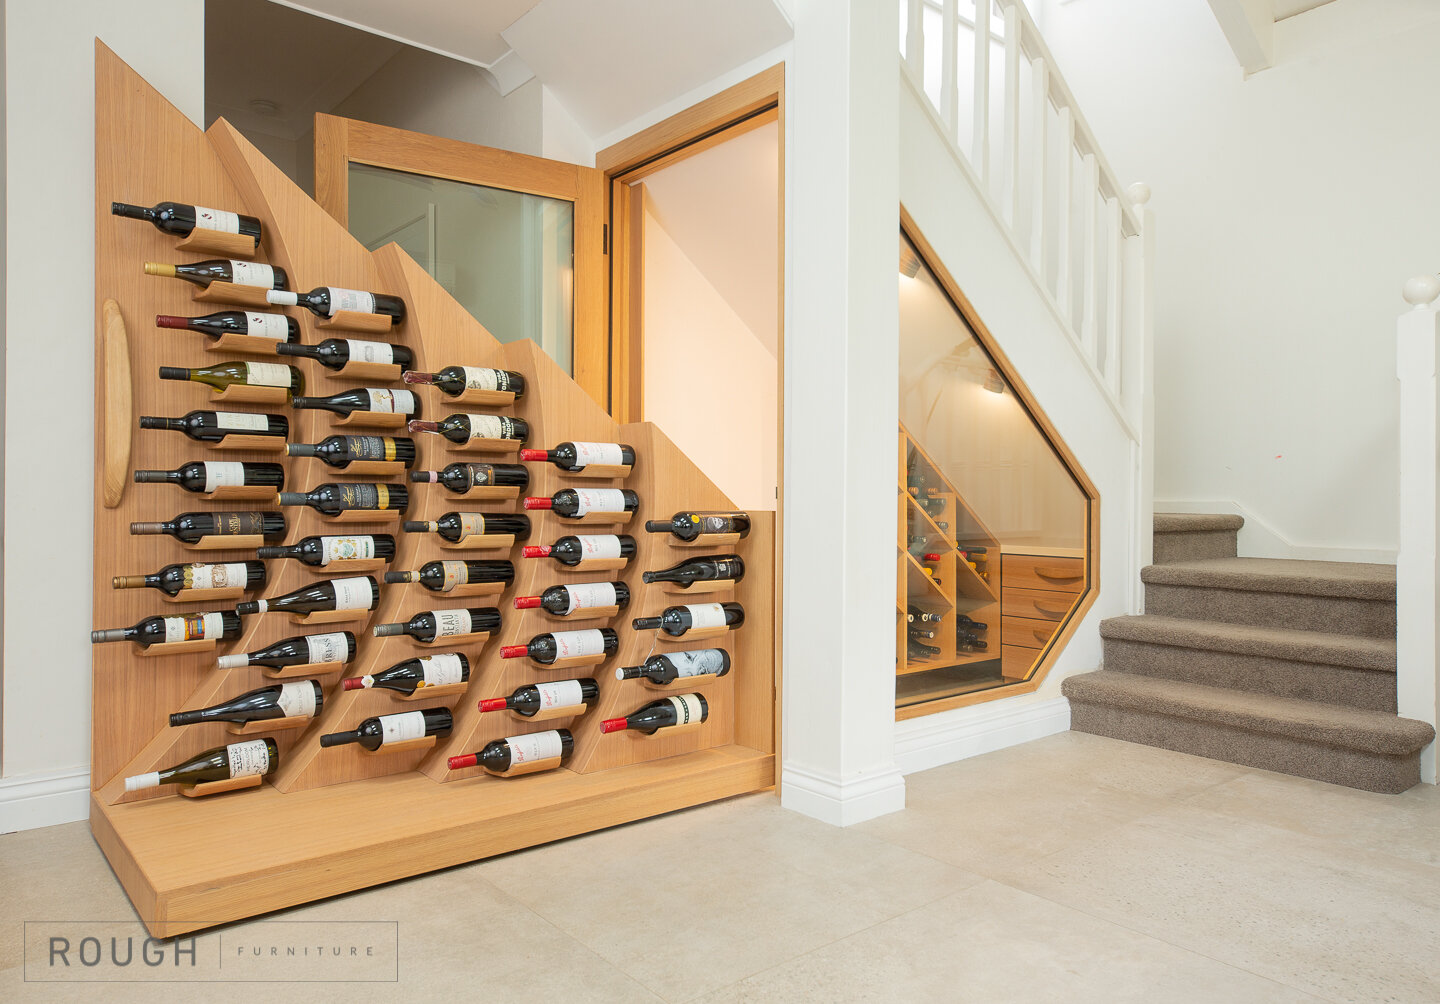 Wave Wine Rack Slide-Out Wine Cellar That's Under The Stairs